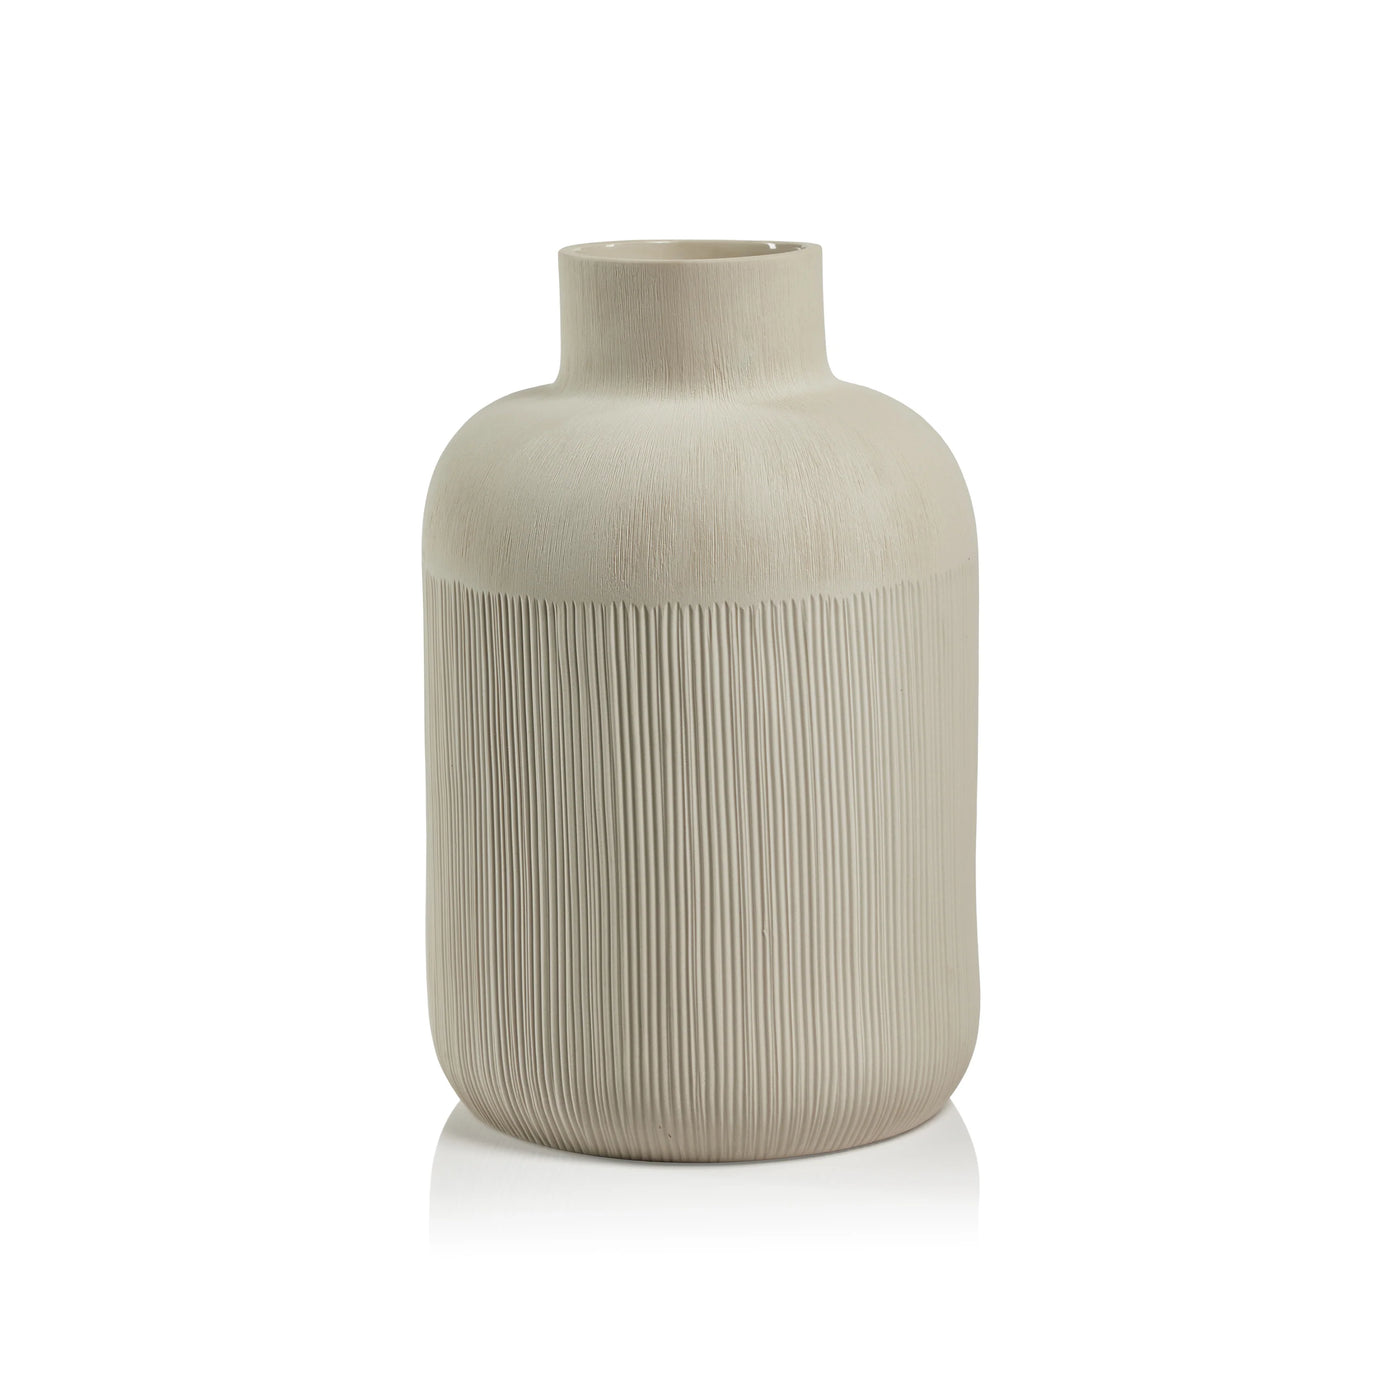 VASE PORCELAIN NEUTRAL GRAY (Available in 2 Sizes)